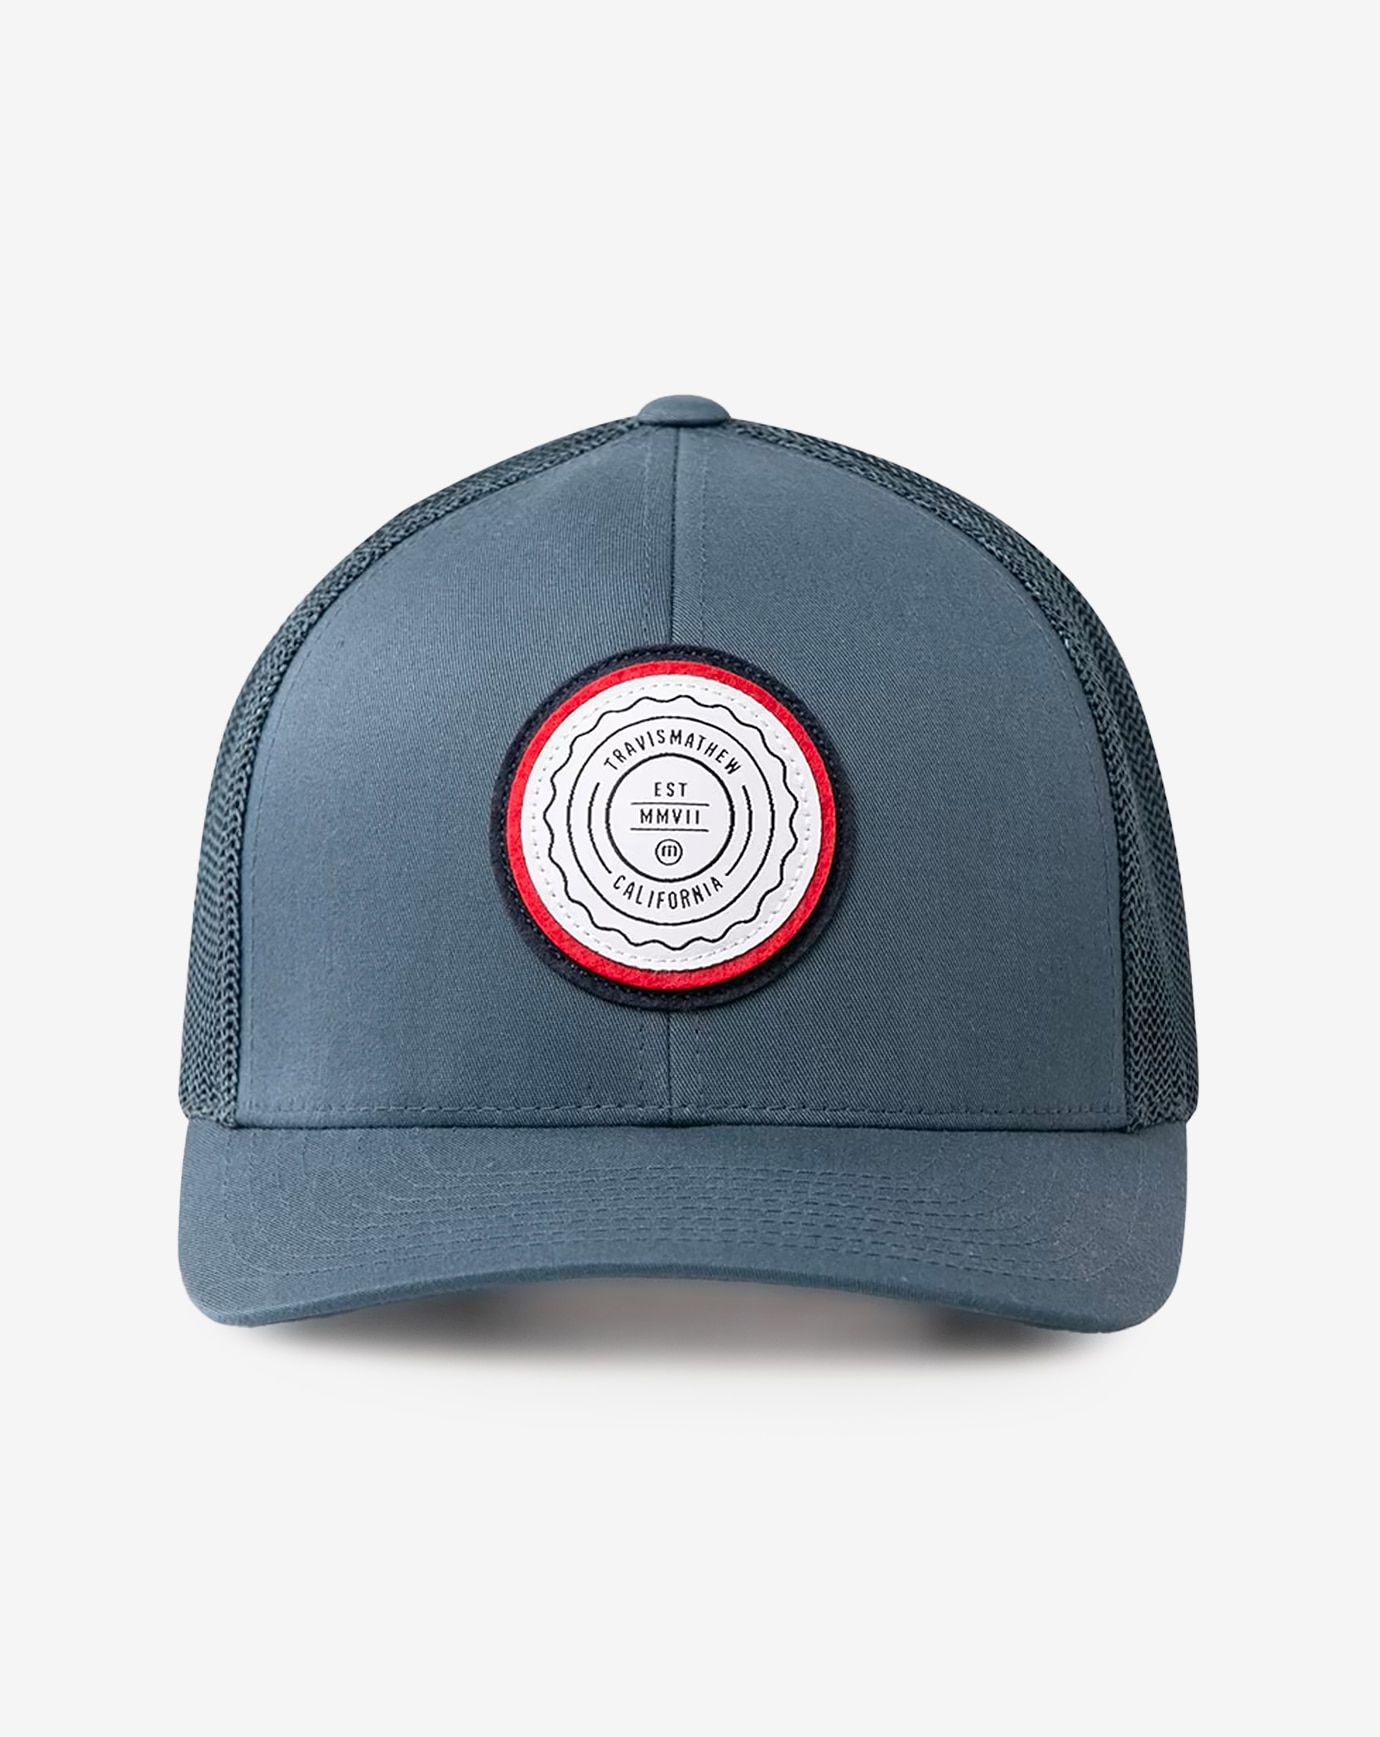 THE PATCH SNAPBACK HAT Image Thumbnail 1